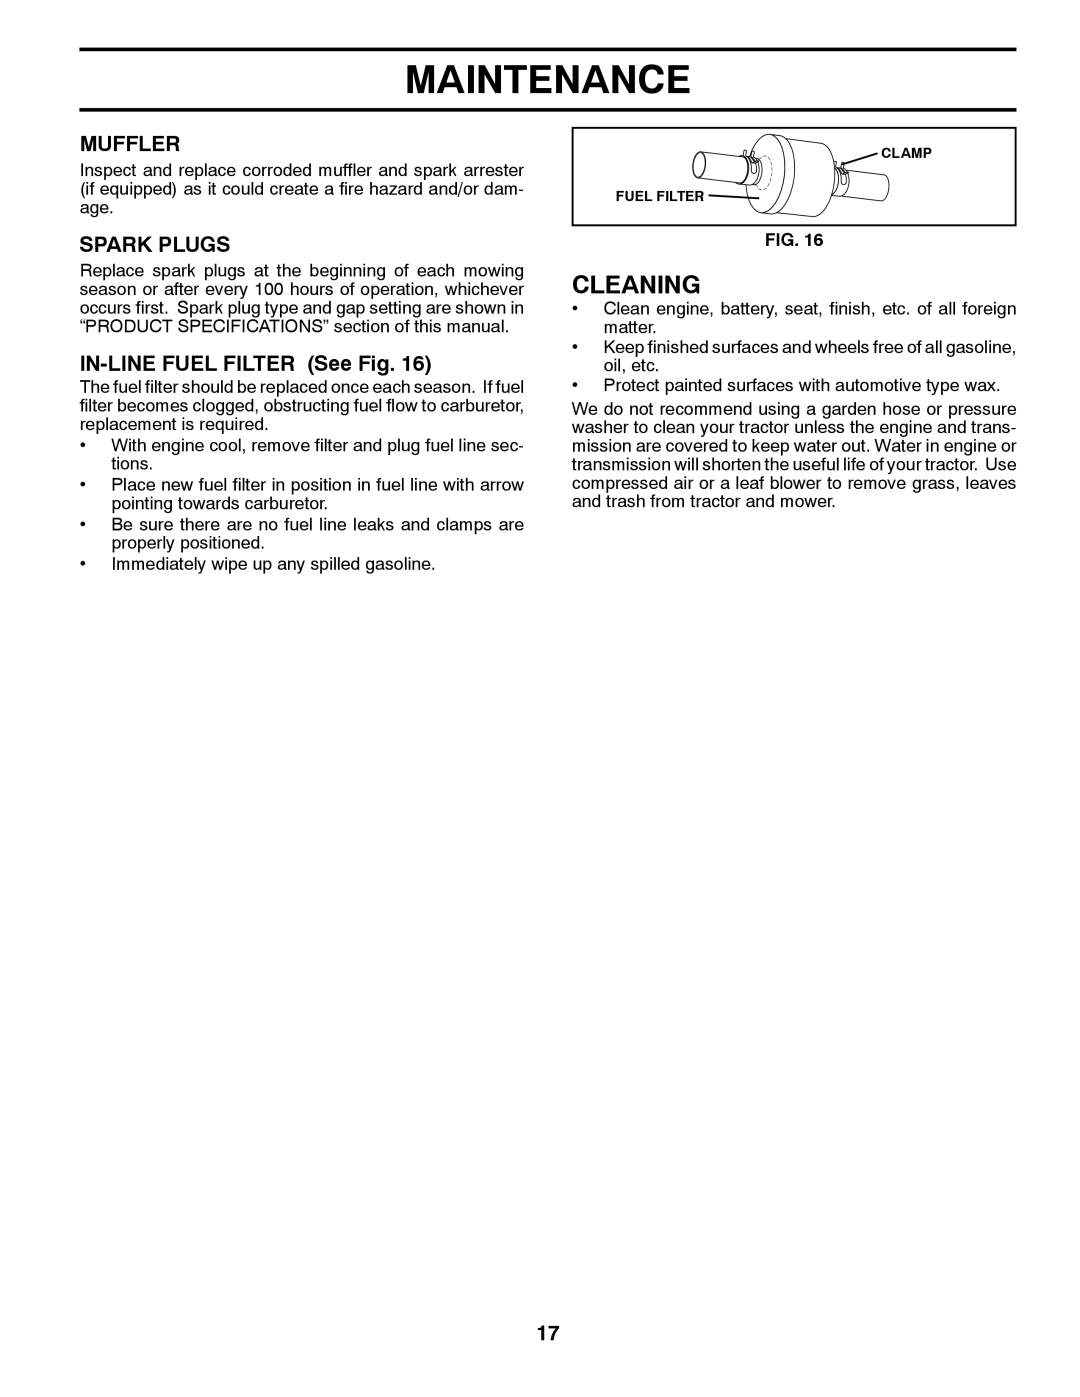 Husqvarna GTH2648 owner manual Cleaning, Muffler, Spark Plugs, IN-LINEFUEL FILTER See Fig, Maintenance 